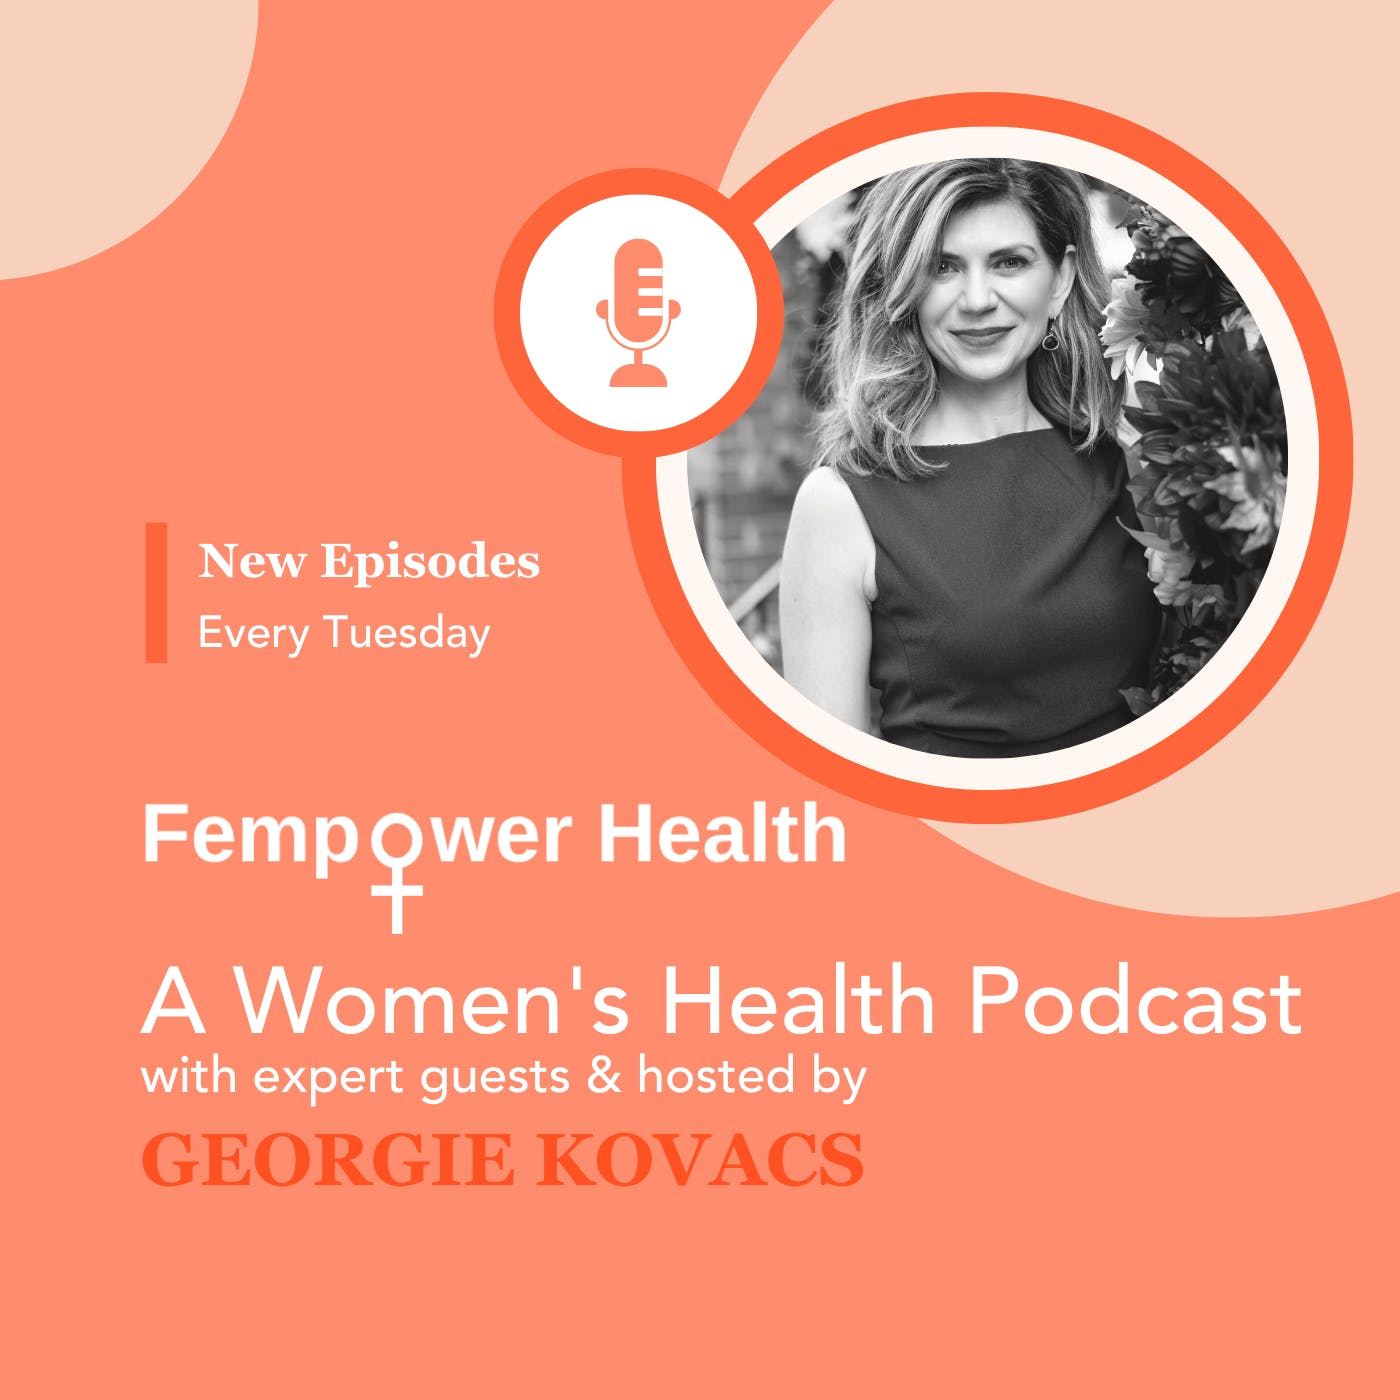 Hear Behind-the-Scenes Bloopers From Season 4 of Fempower Health